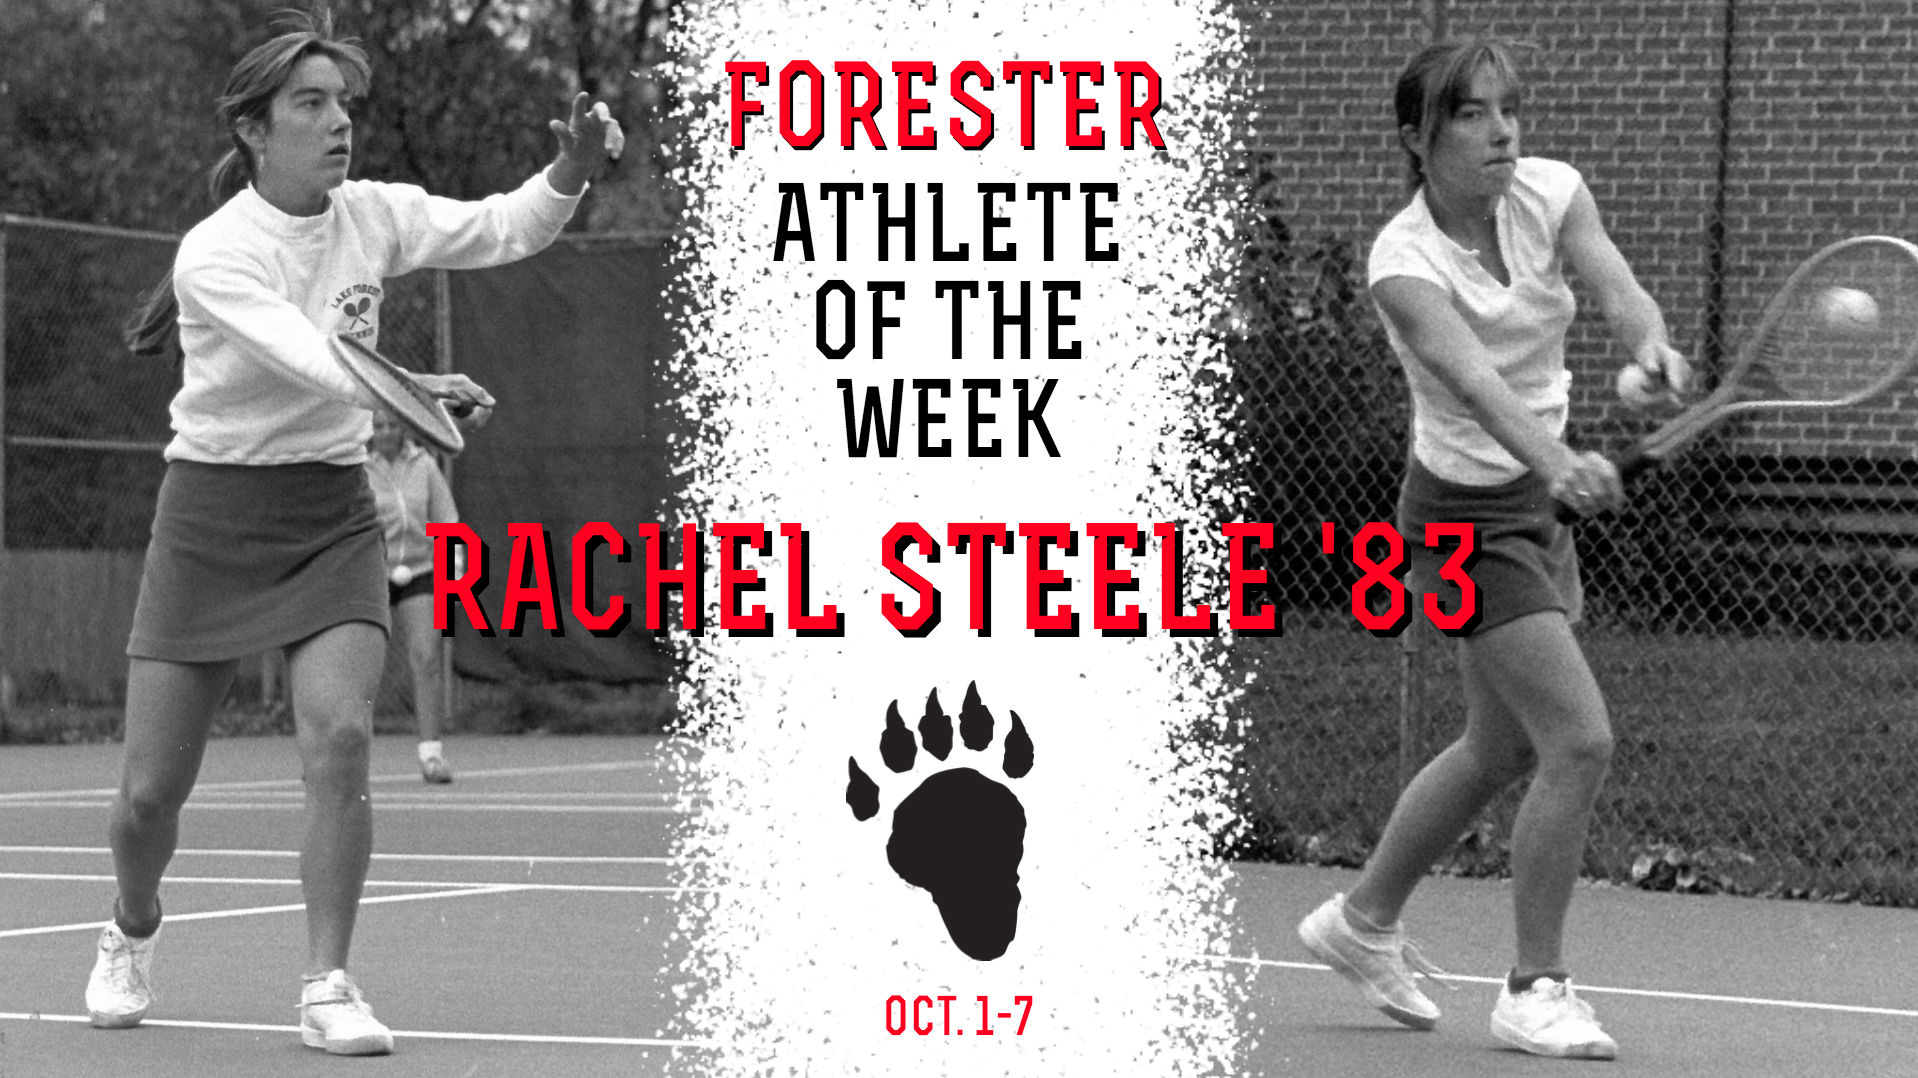 Rachel Steele '83 Named Forester Athlete of the Week